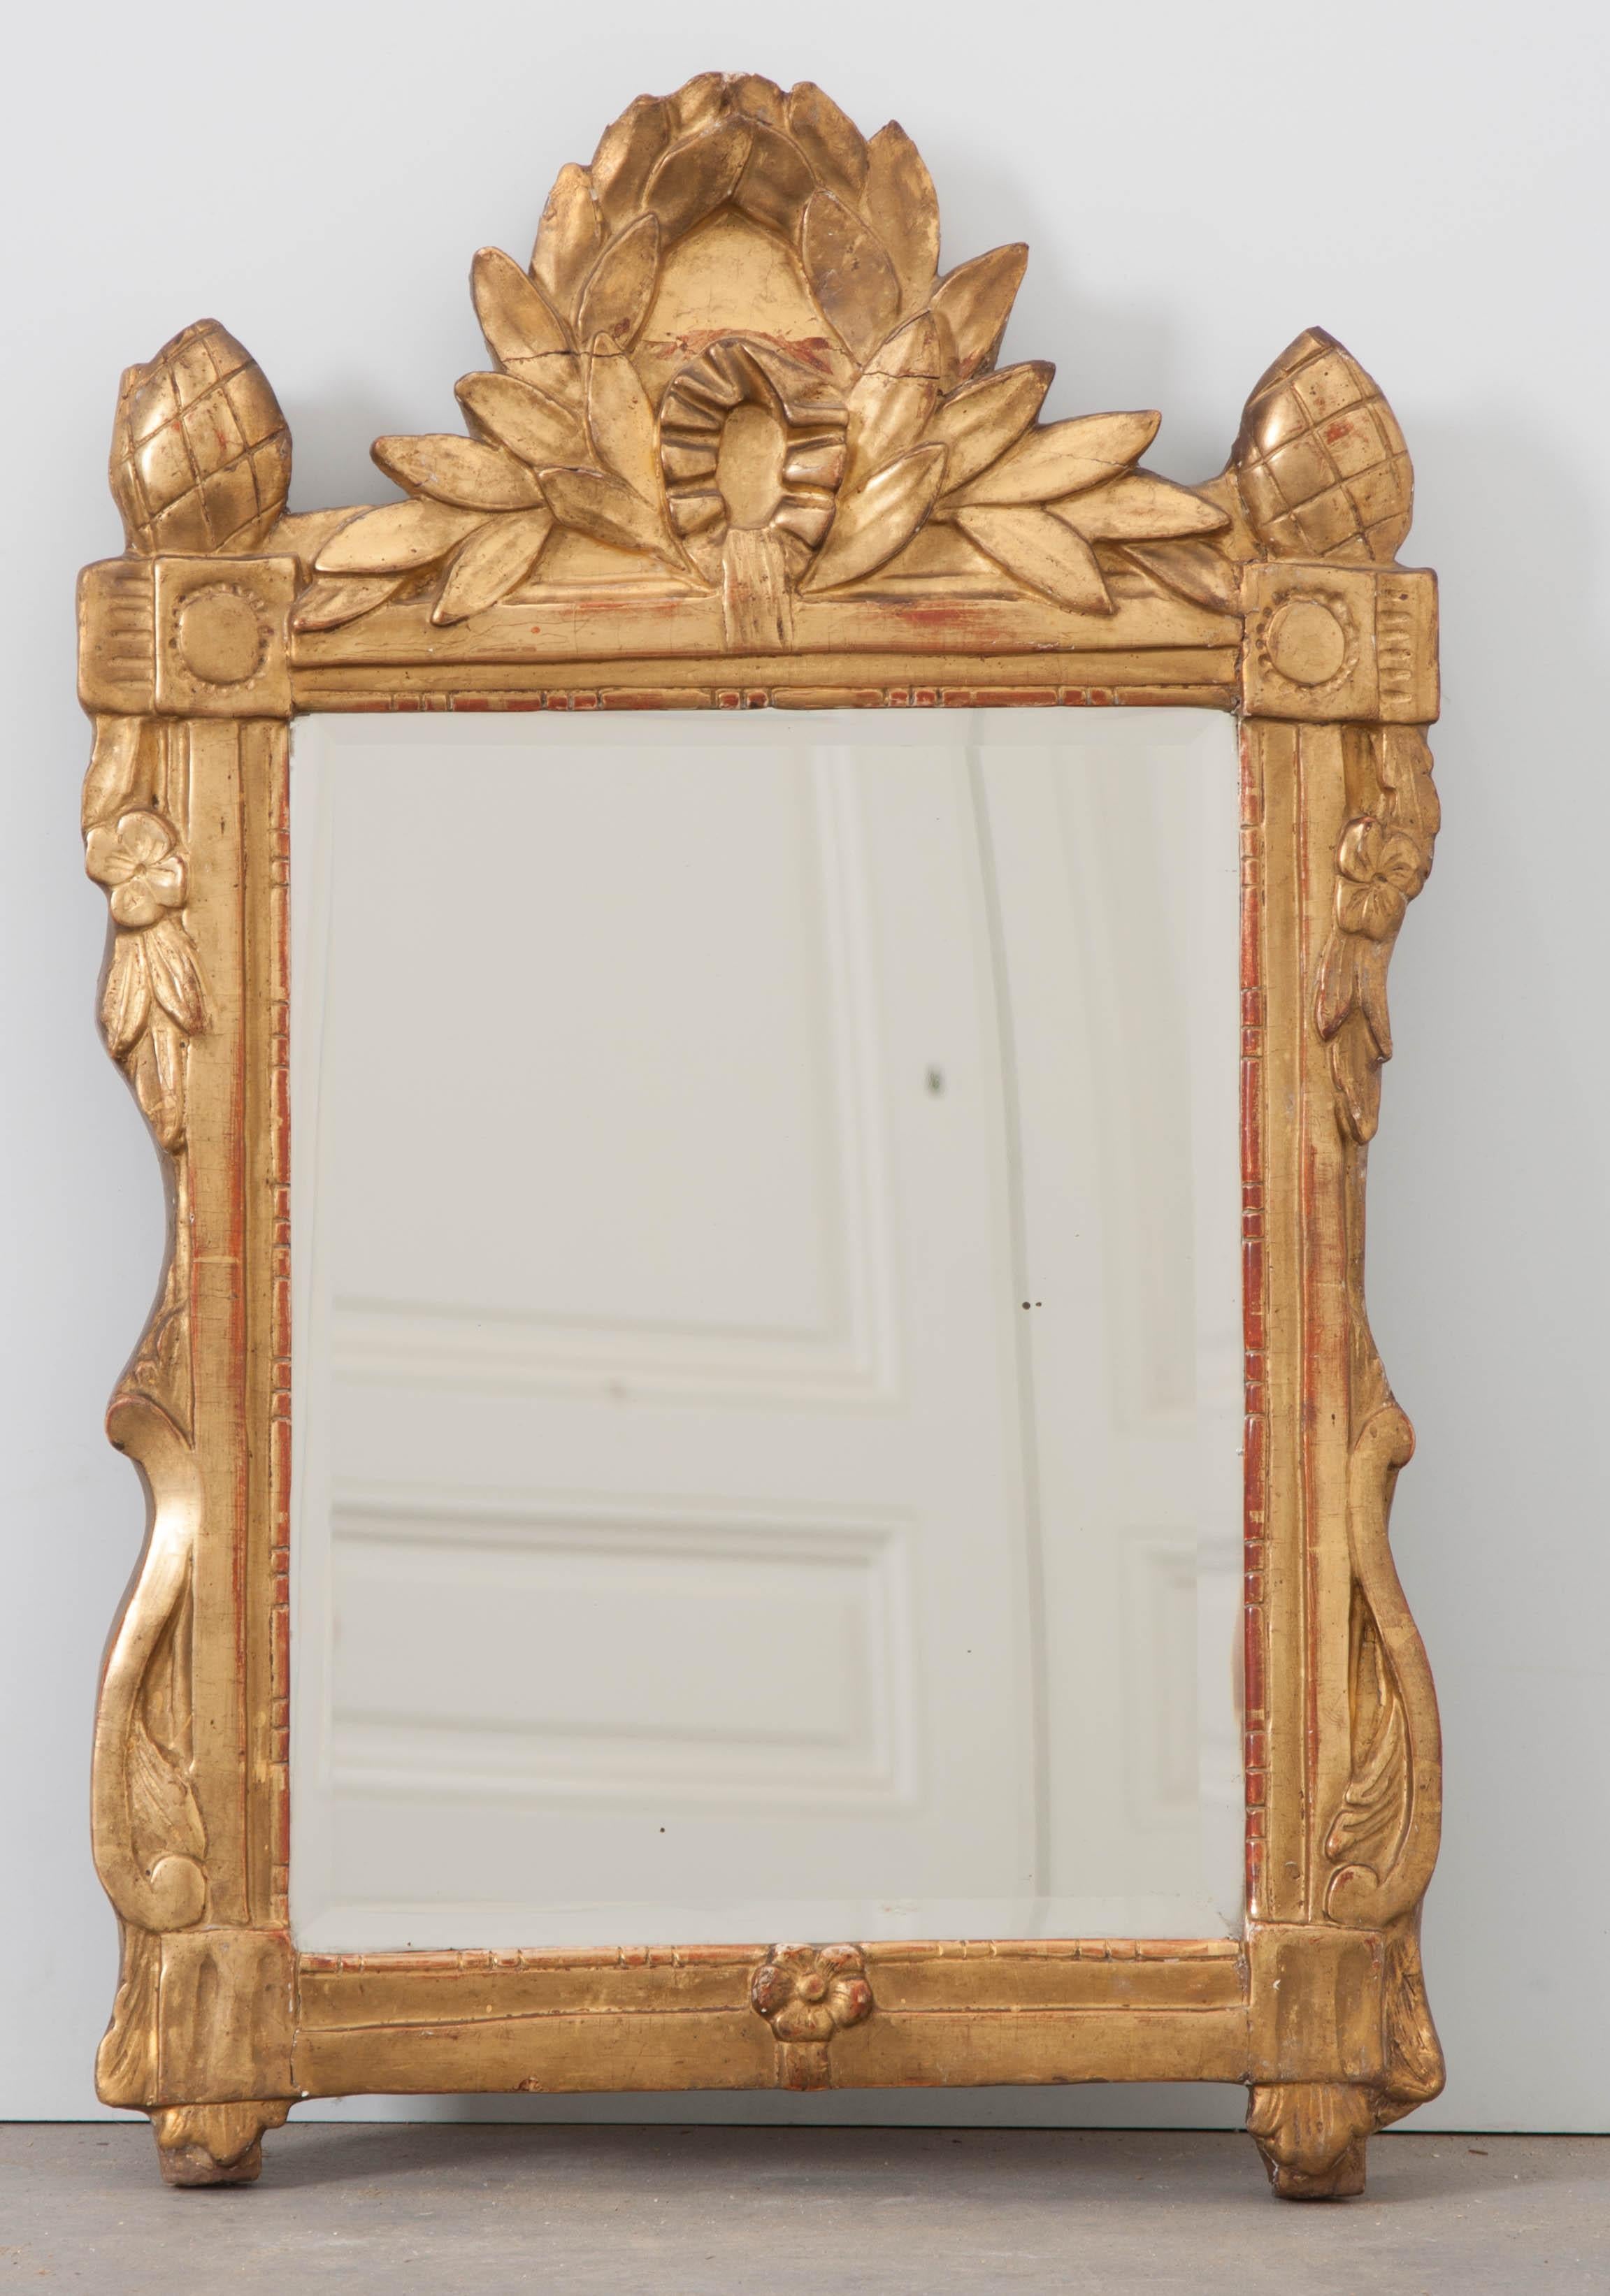 A brilliant Louis XVI style gold gilt mirror from 19th century France. Two gilt pineapples flank the central laurel wreath crest found atop the small mirror’s frame. Floral and scrolled details embellish the frame’s sides with a dashed beaded pearl